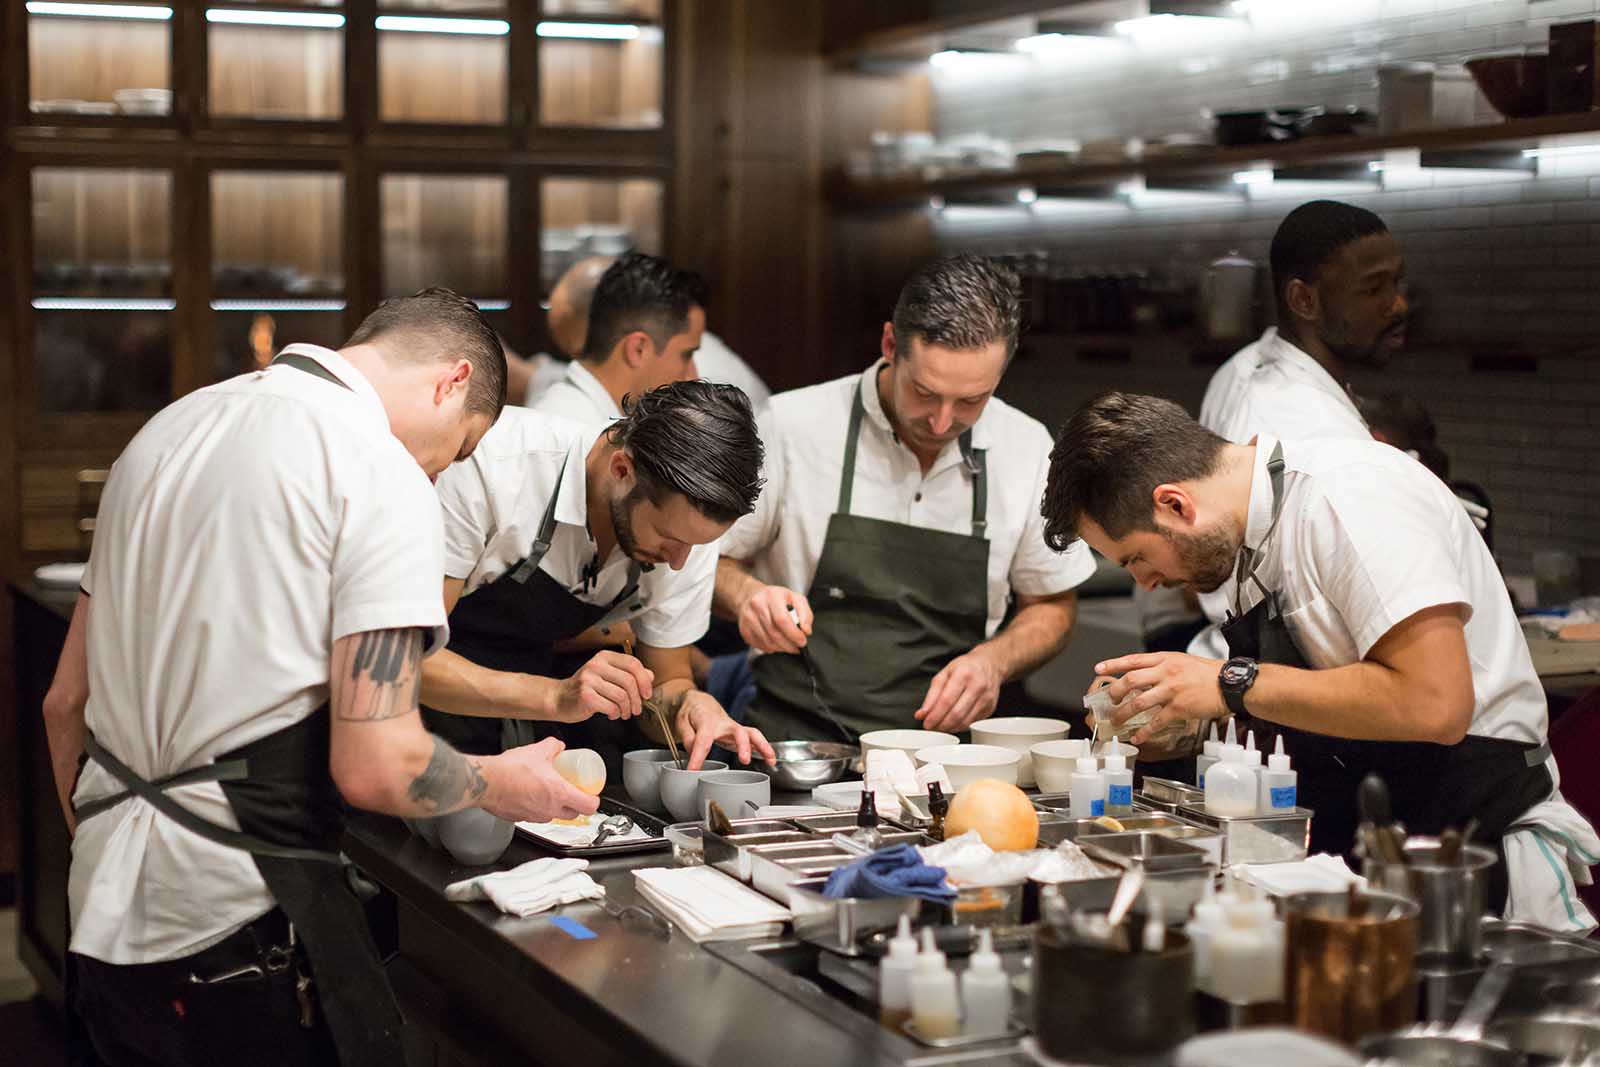 Chefs in the kitchen at Michelin-starred Smyth, West Loop, Chicago | See Chicago like a local